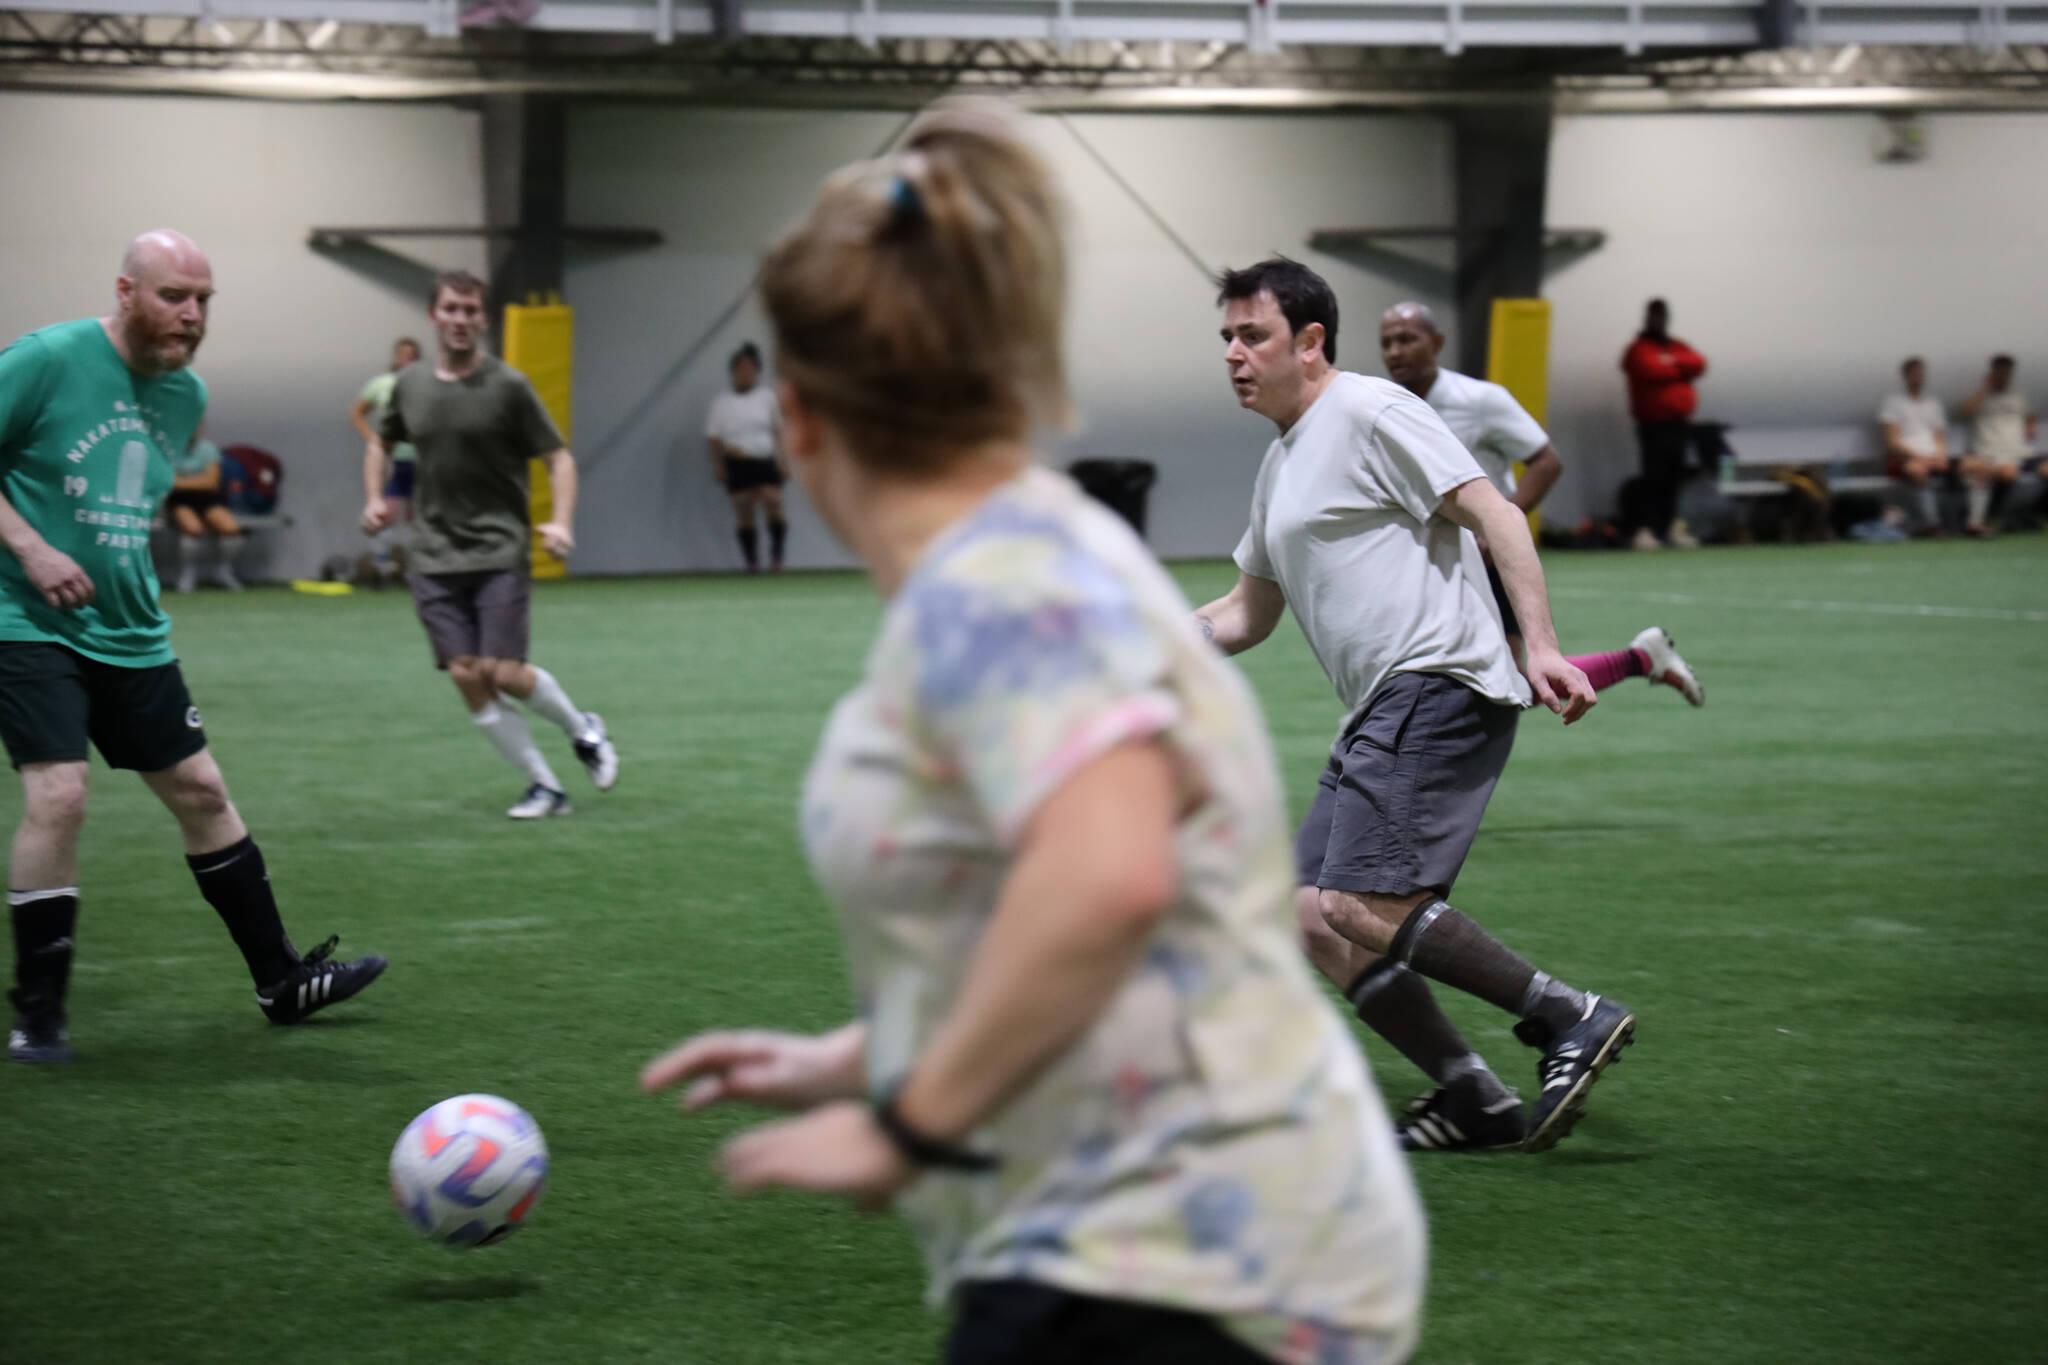 Ann Hoke await a pass from her teammate, Mickey Kenny, during a soccer match Monday evening at the Dimond Park Field House a part of the Holiday Cup soccer tournament. (Clarise Larson / Juneau Empire)